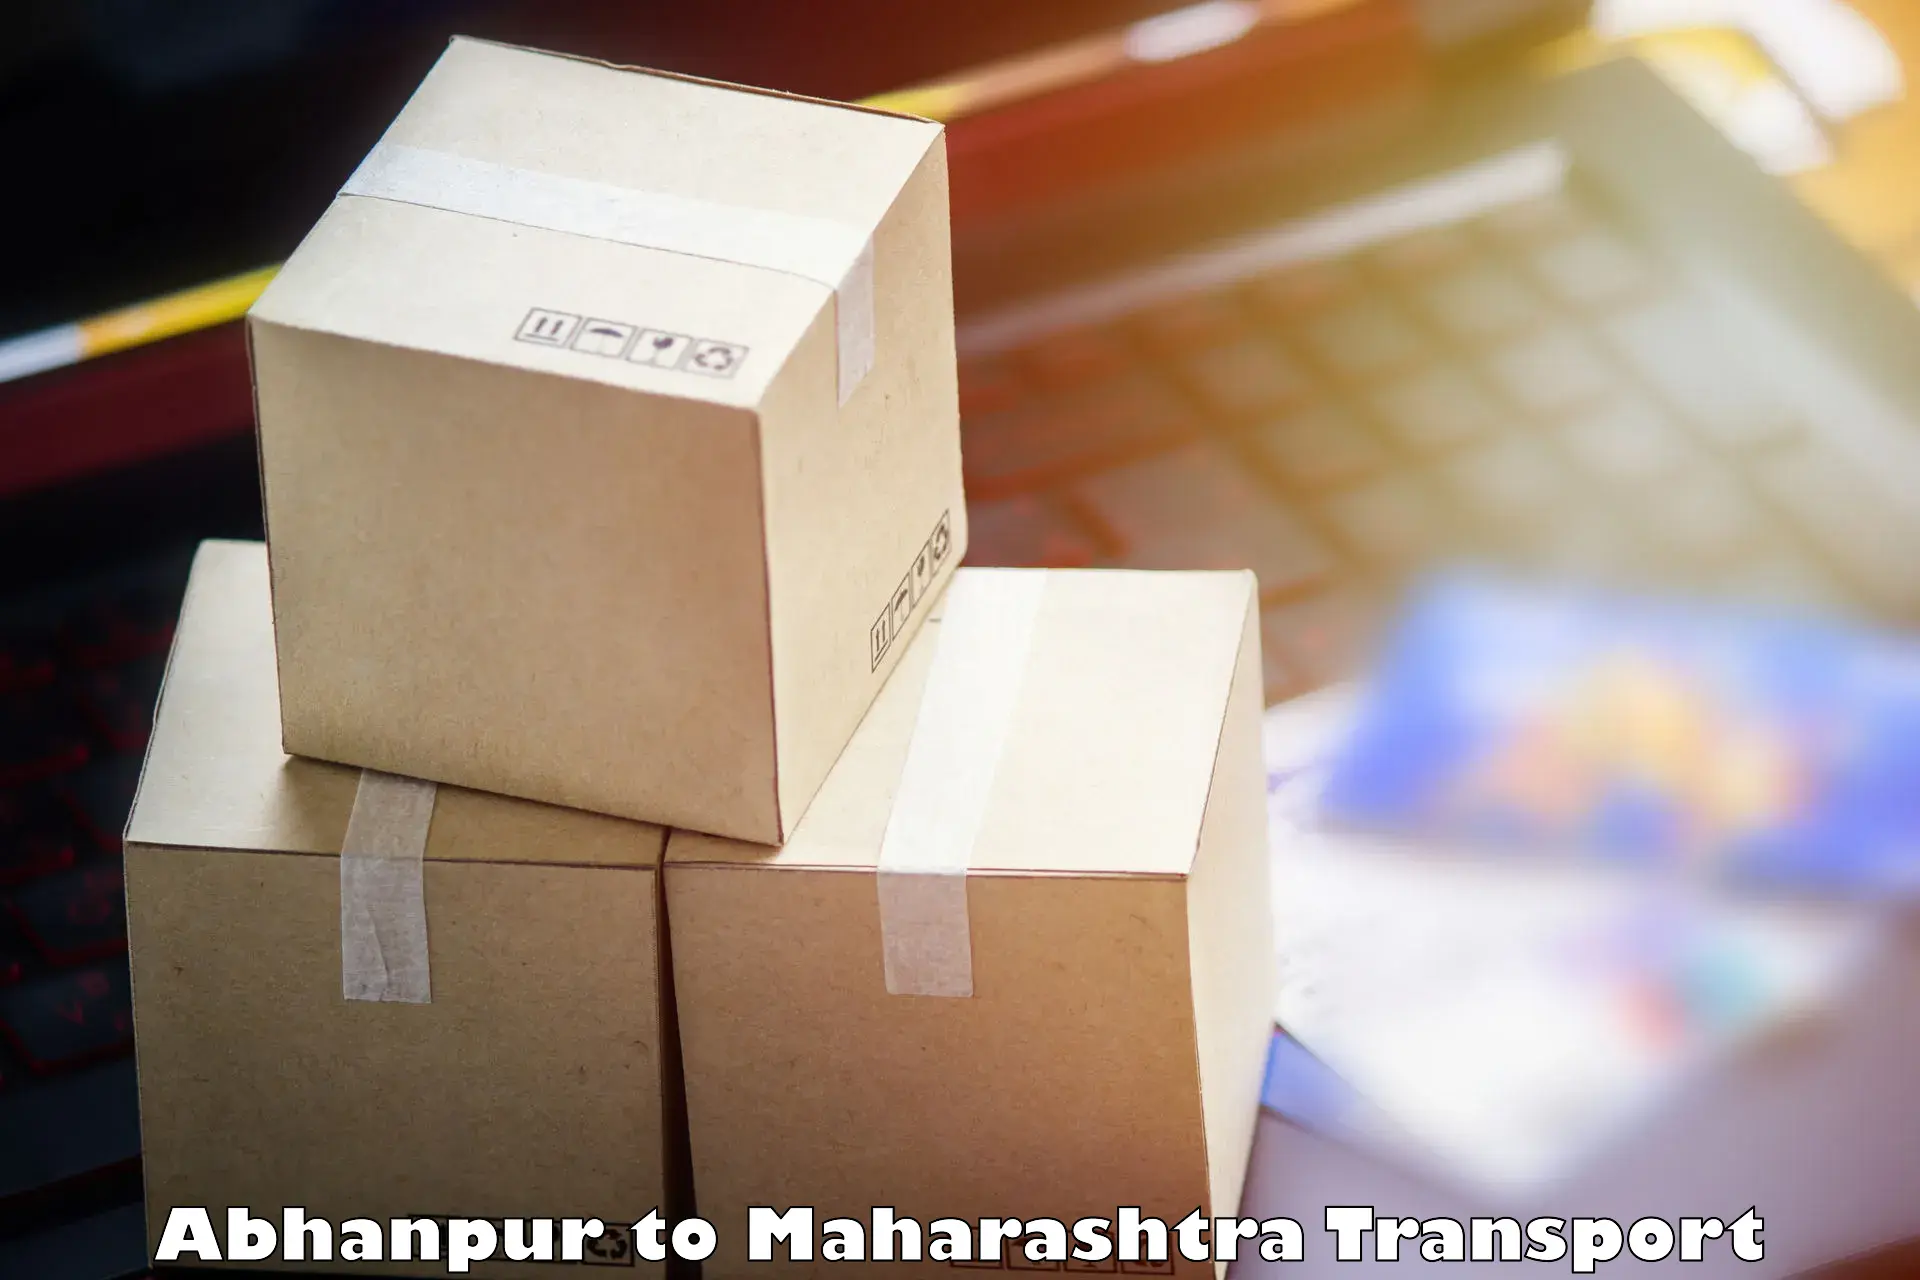 Road transport online services Abhanpur to DY Patil Vidyapeeth Mumbai